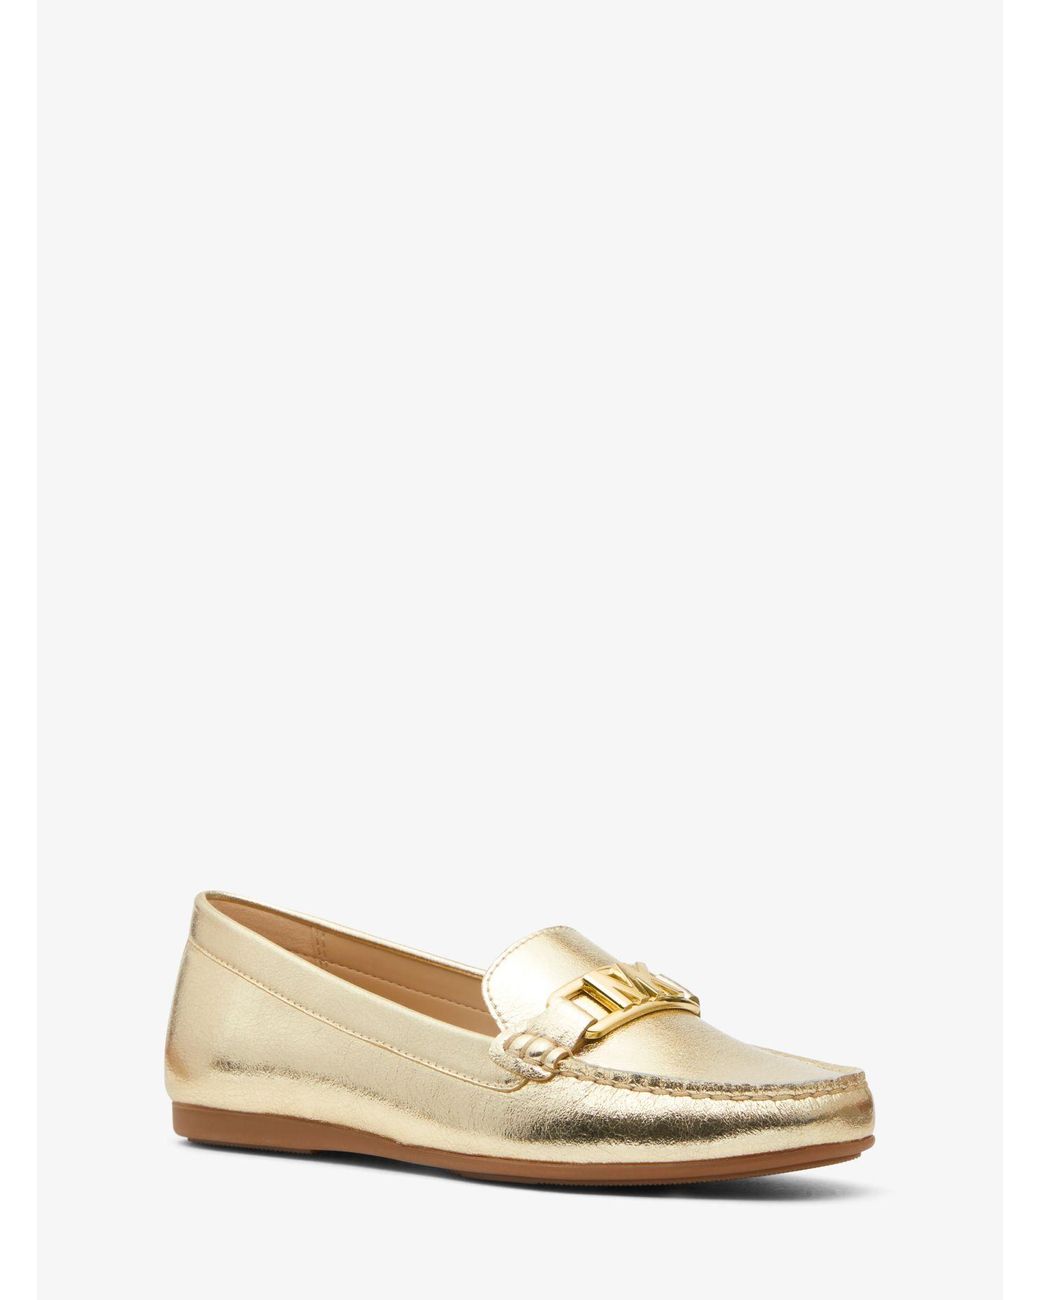 Michael Kors Camila Metallic Faux Leather Moccasin in Natural | Lyst